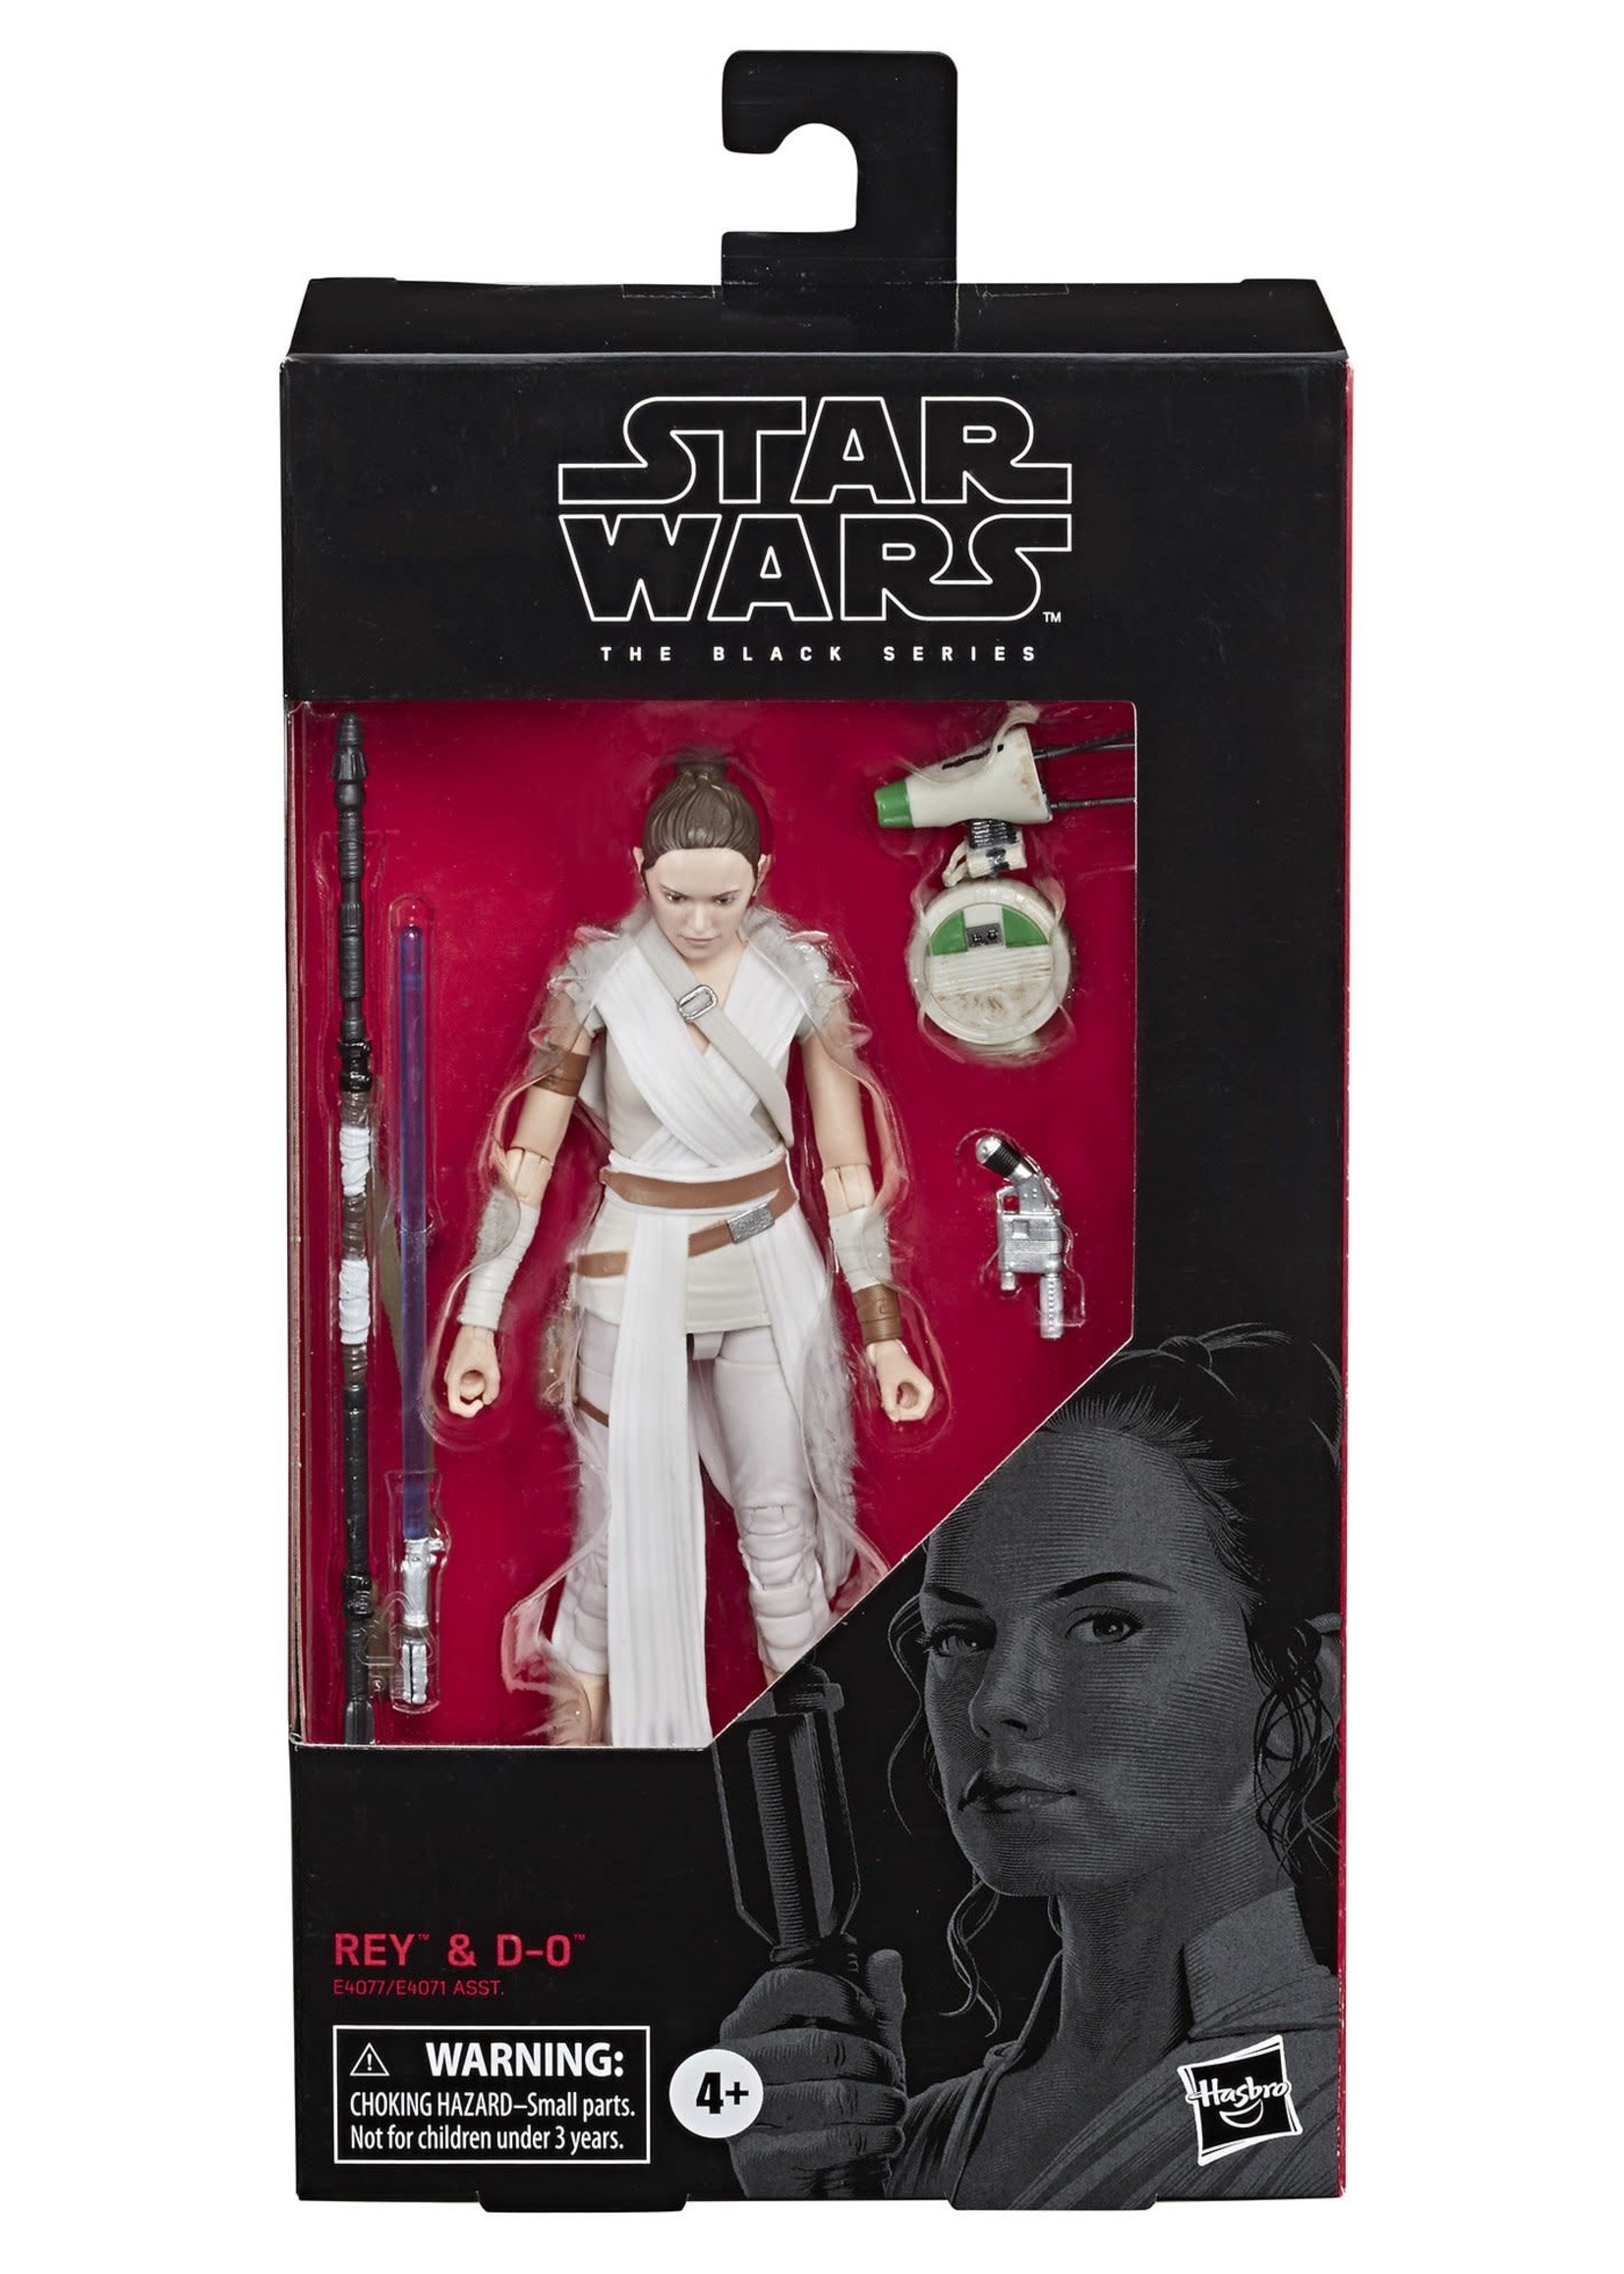 Star Wars Star Wars The Black Series: Rey and D-O Figures